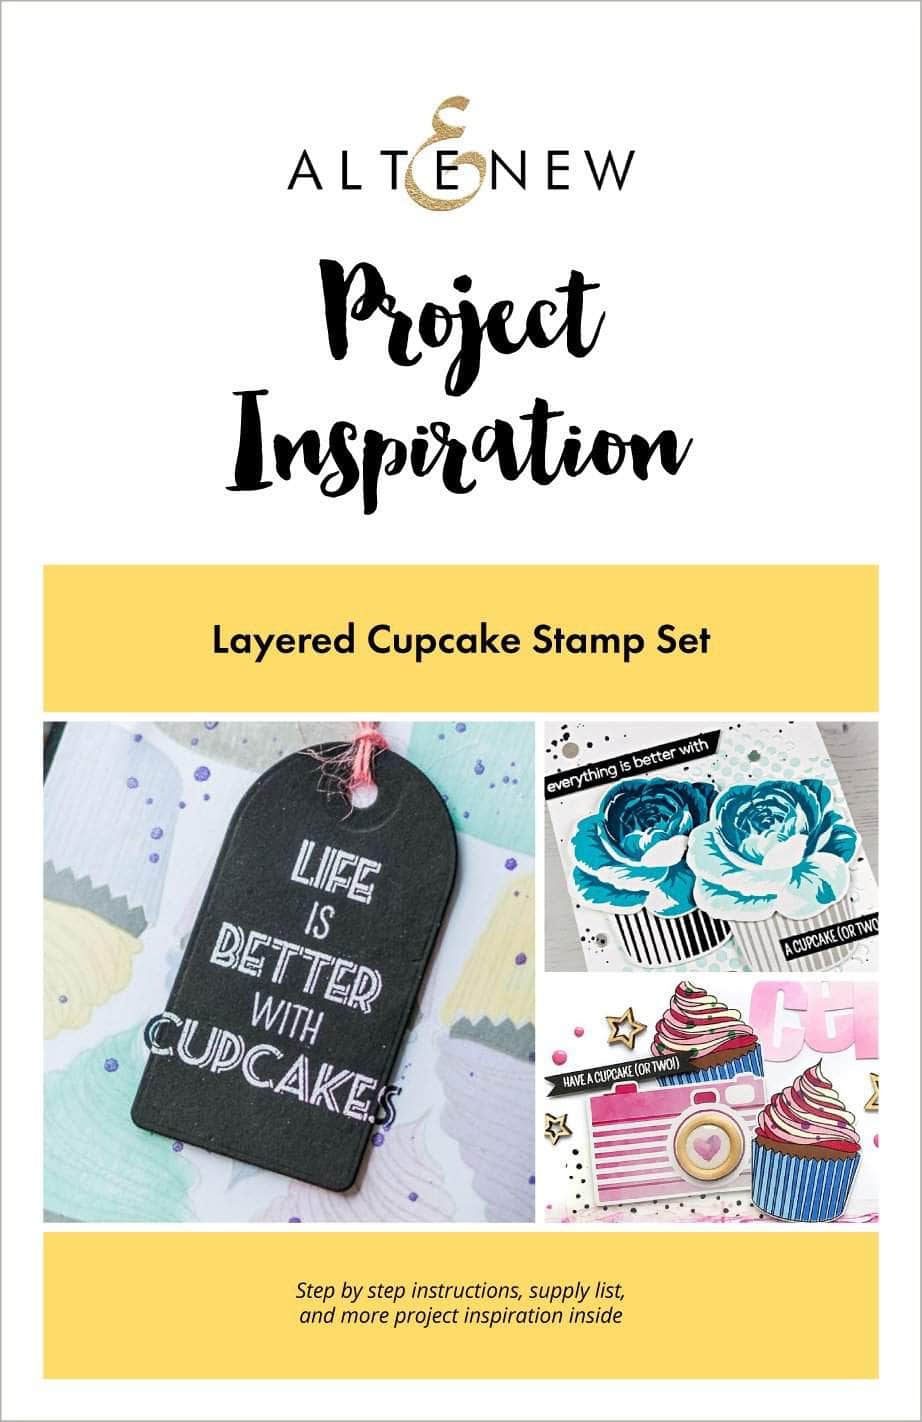 Printed Media Layered Cupcake Project Inspiration Guide